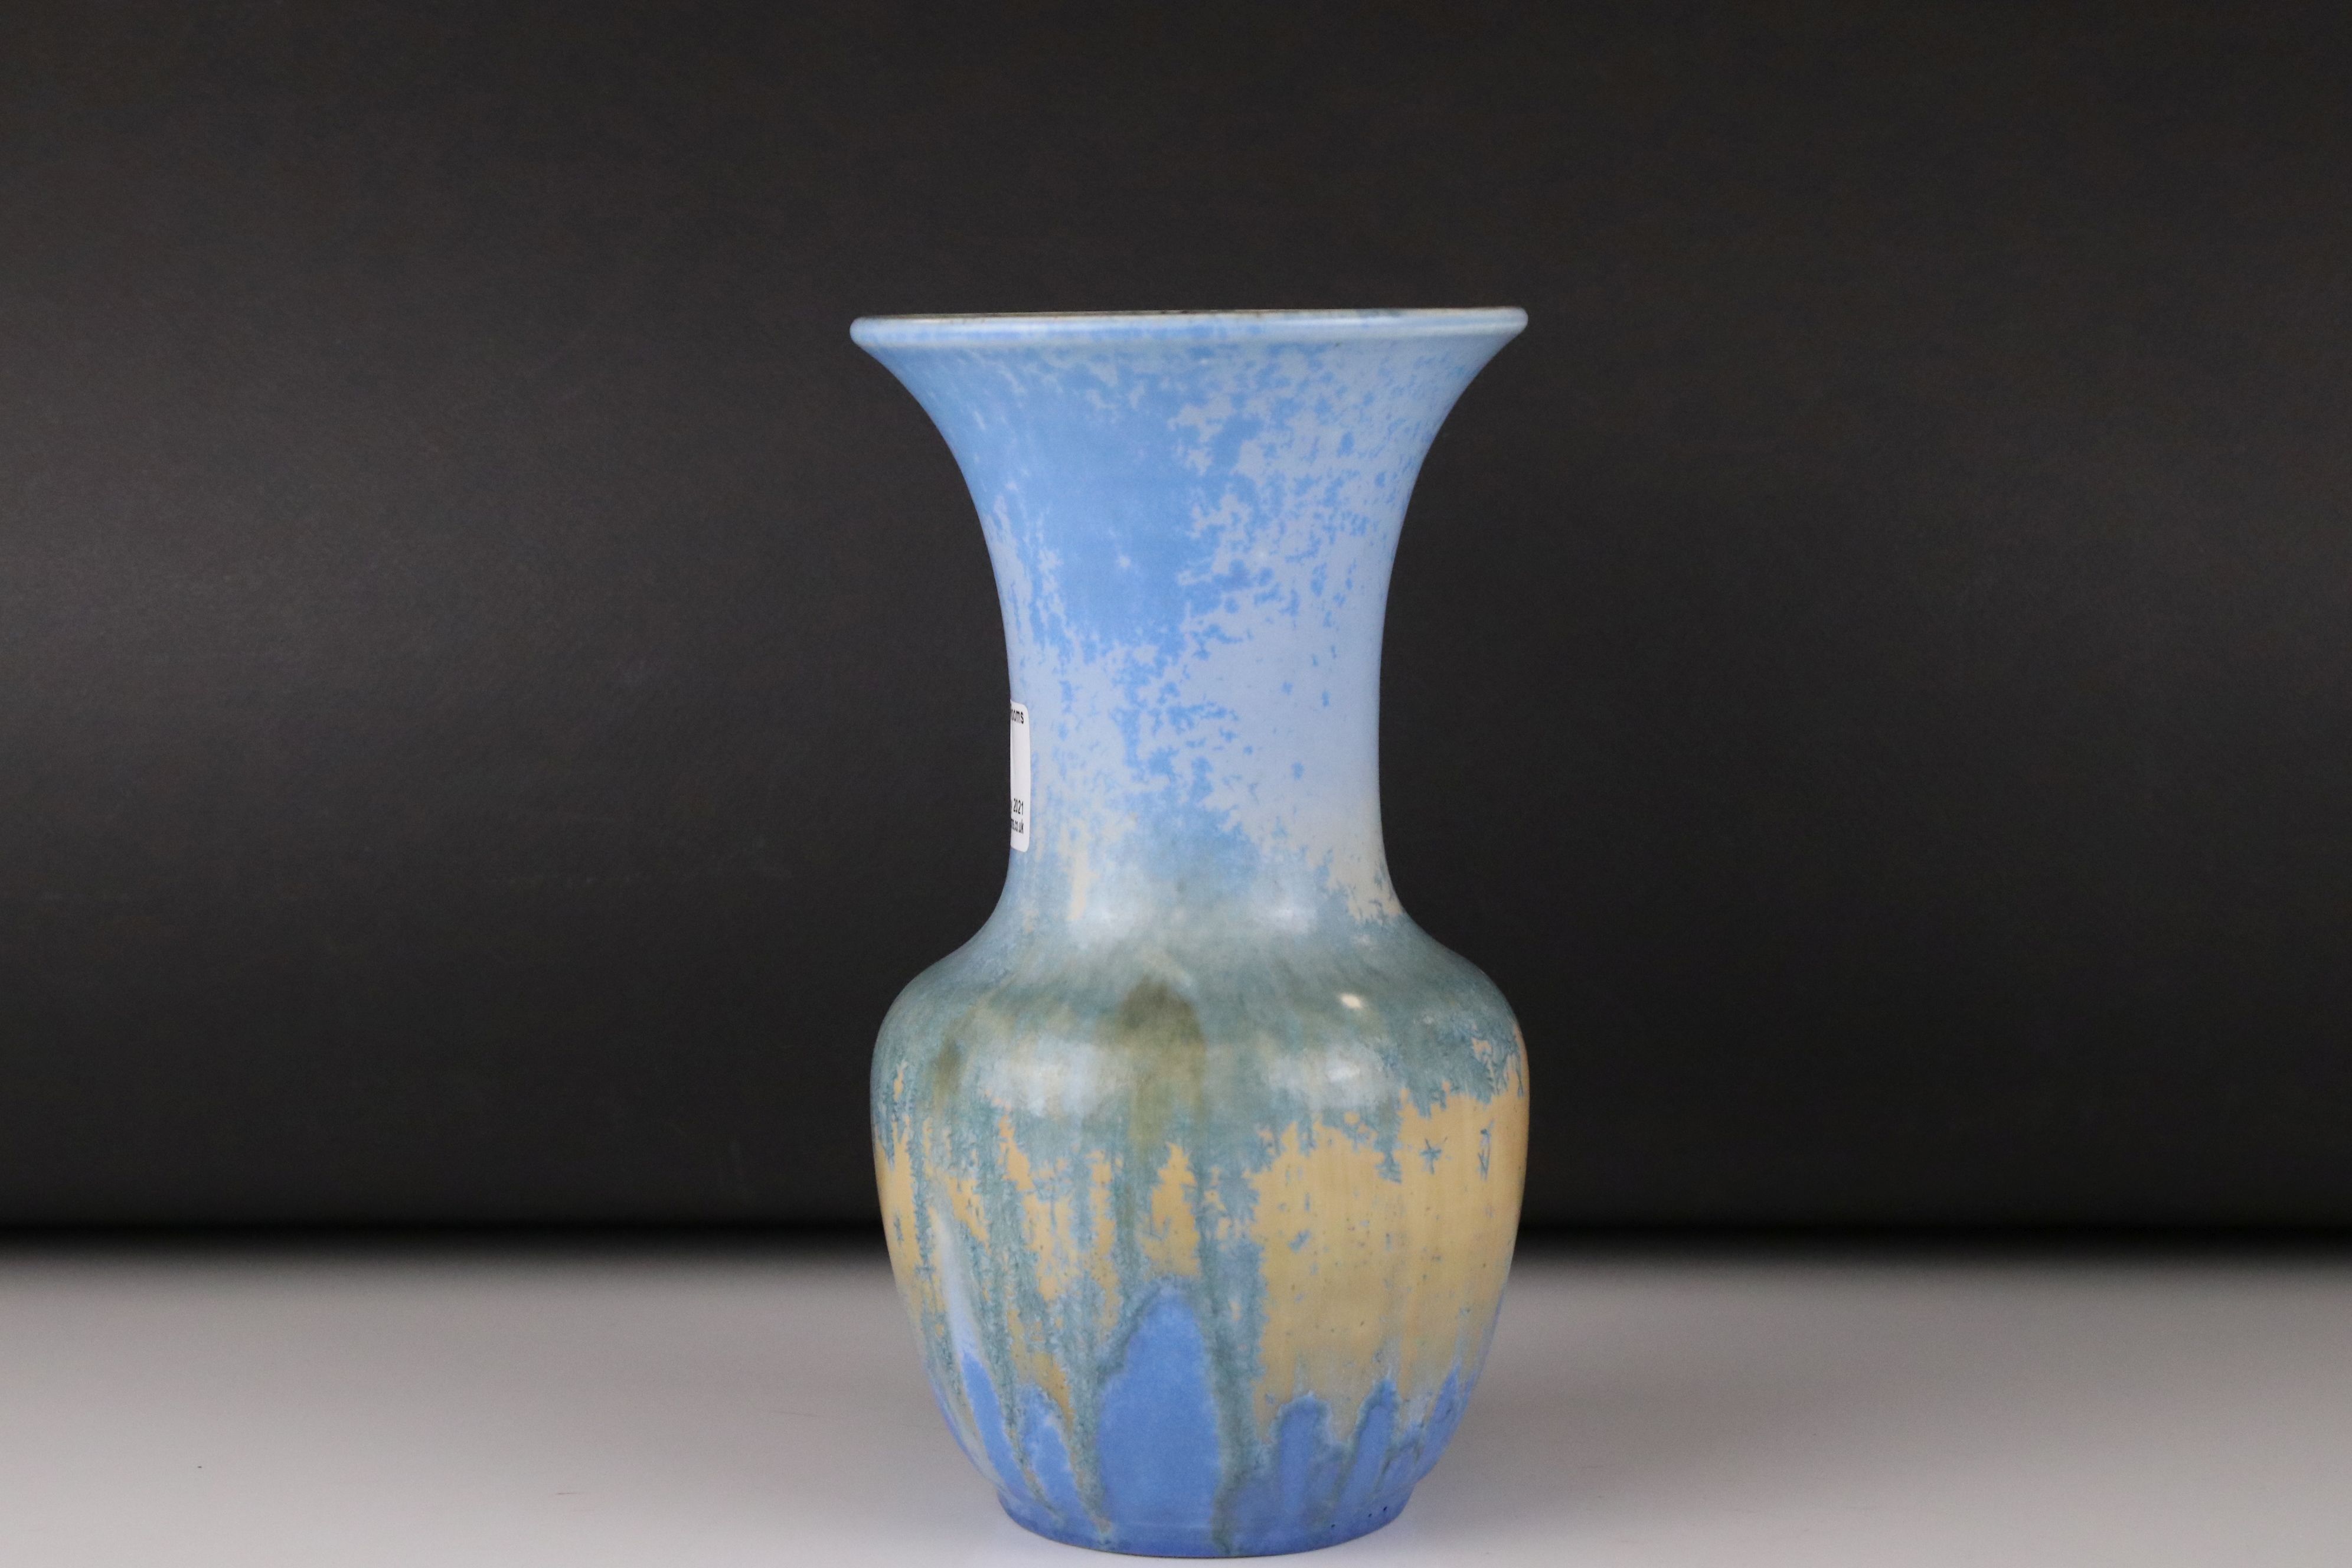 A 20th century Ruskin pottery trumpet shaped vase Crystalline Decoration impressed mark and 1932, 20 - Image 3 of 5